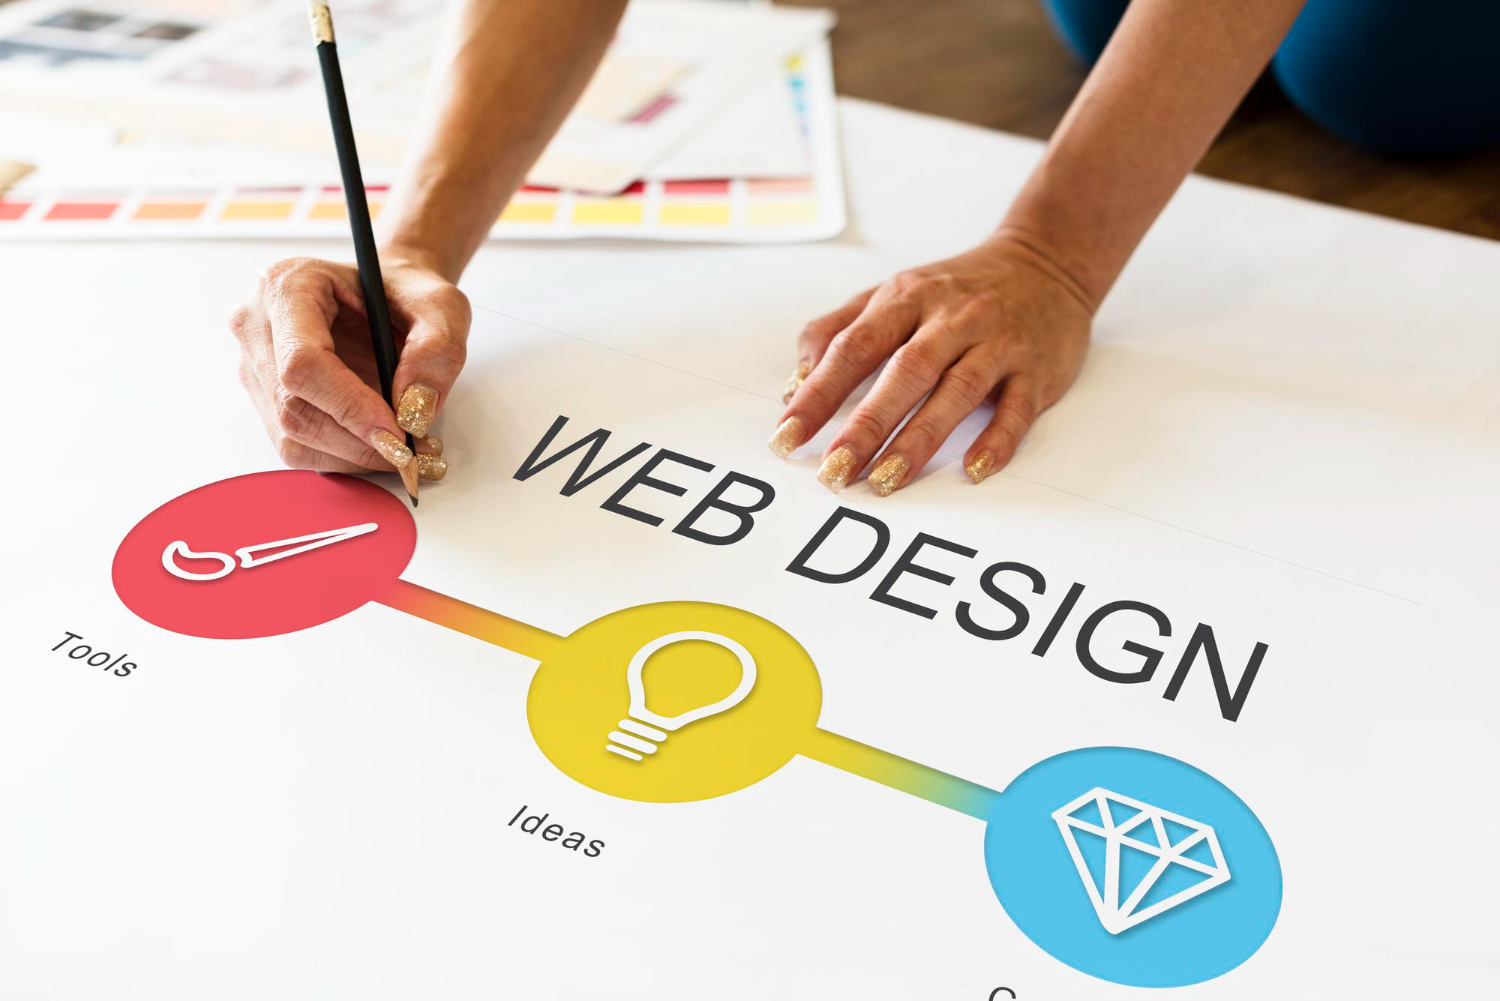 25 Website Design Terms You Should Know